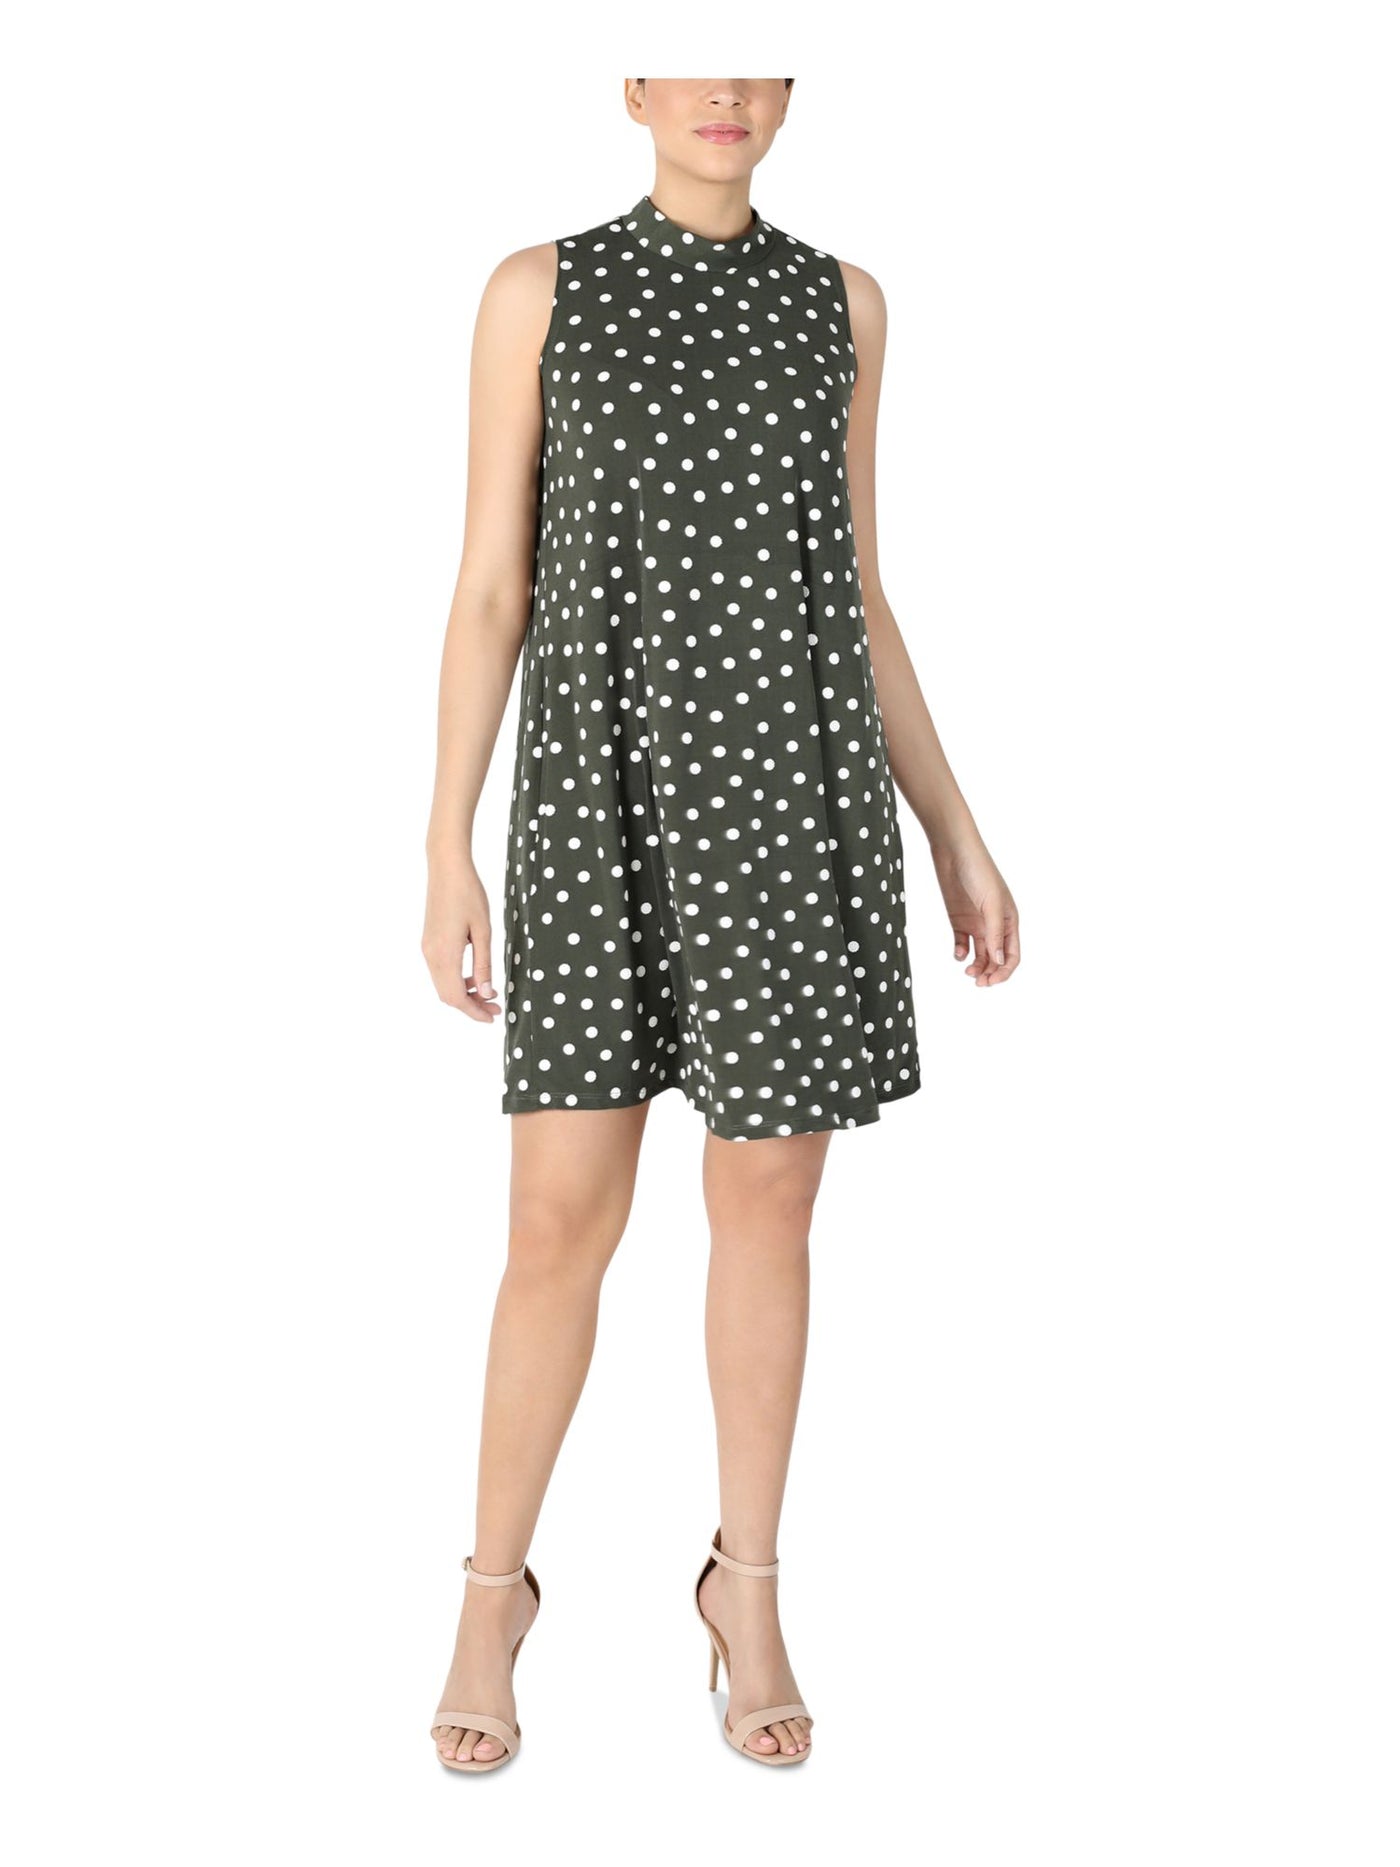 SIGNATURE BY ROBBIE BEE Womens Green Stretch Polka Dot Sleeveless Mock Neck Above The Knee Party Shift Dress Petites PS